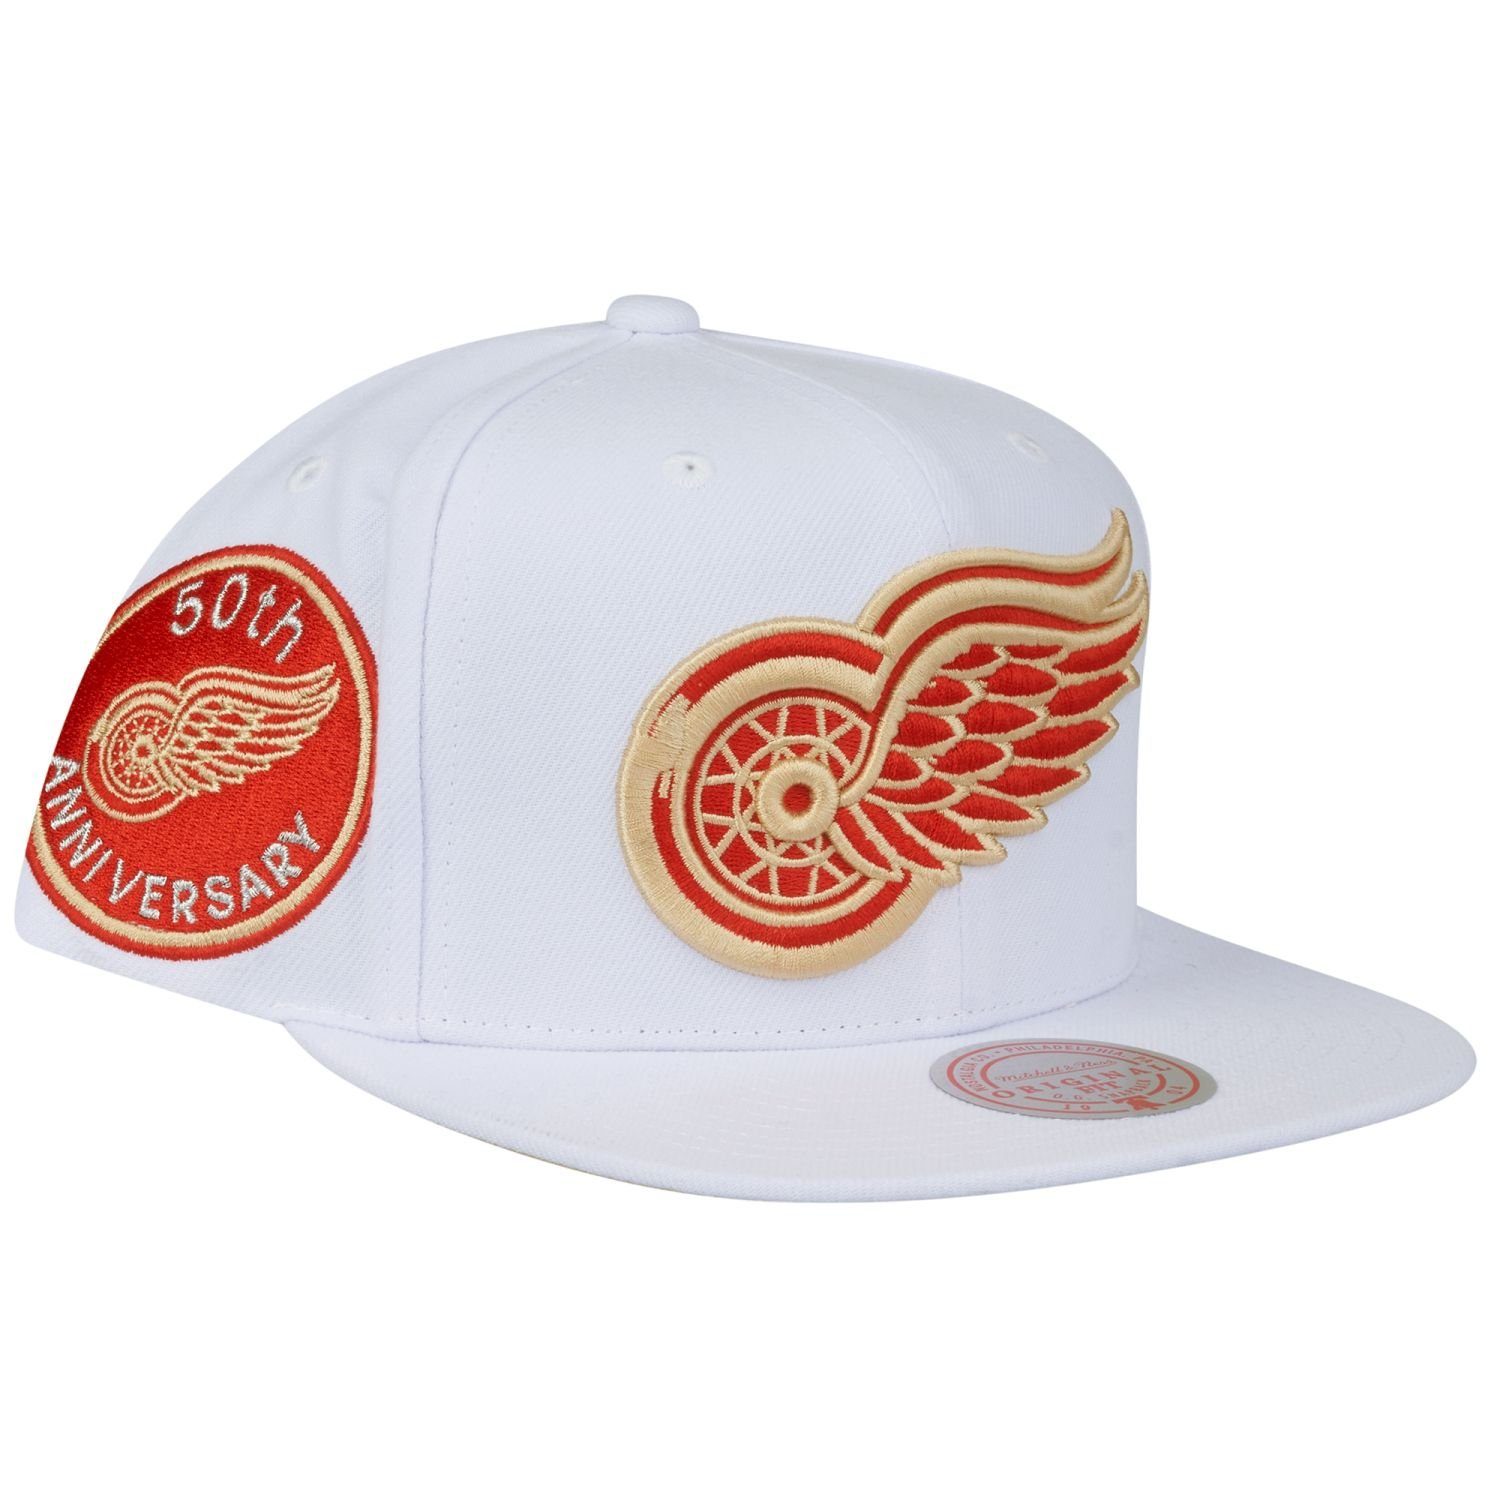 & Detroit Cap WHITE Mitchell Ness Snapback Red Wings